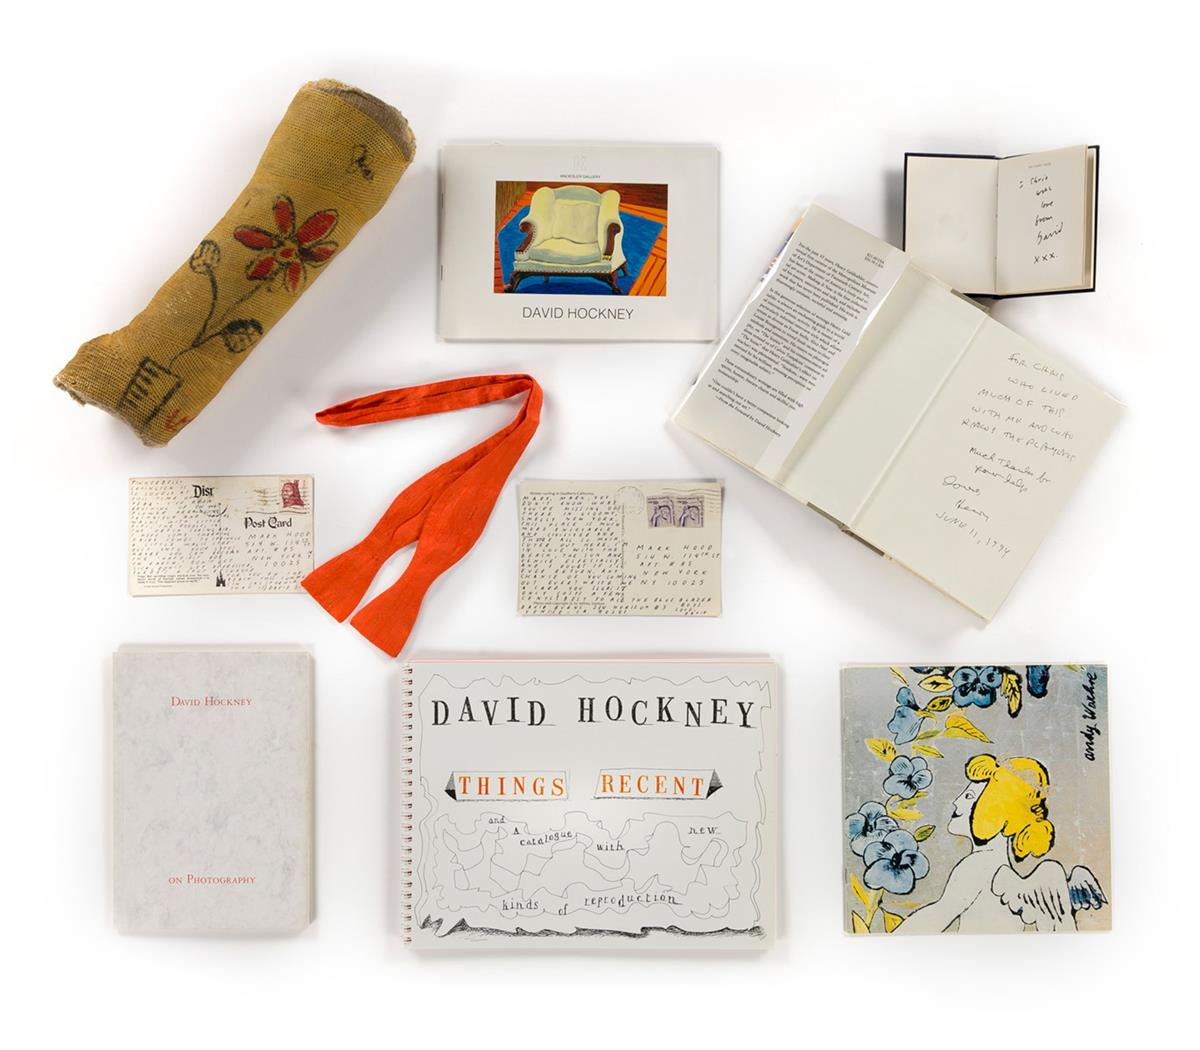 DAVID HOCKNEY (1937 - ) Collection of Ephemera Including 2 Postcards and an Illustrated Arm Cast